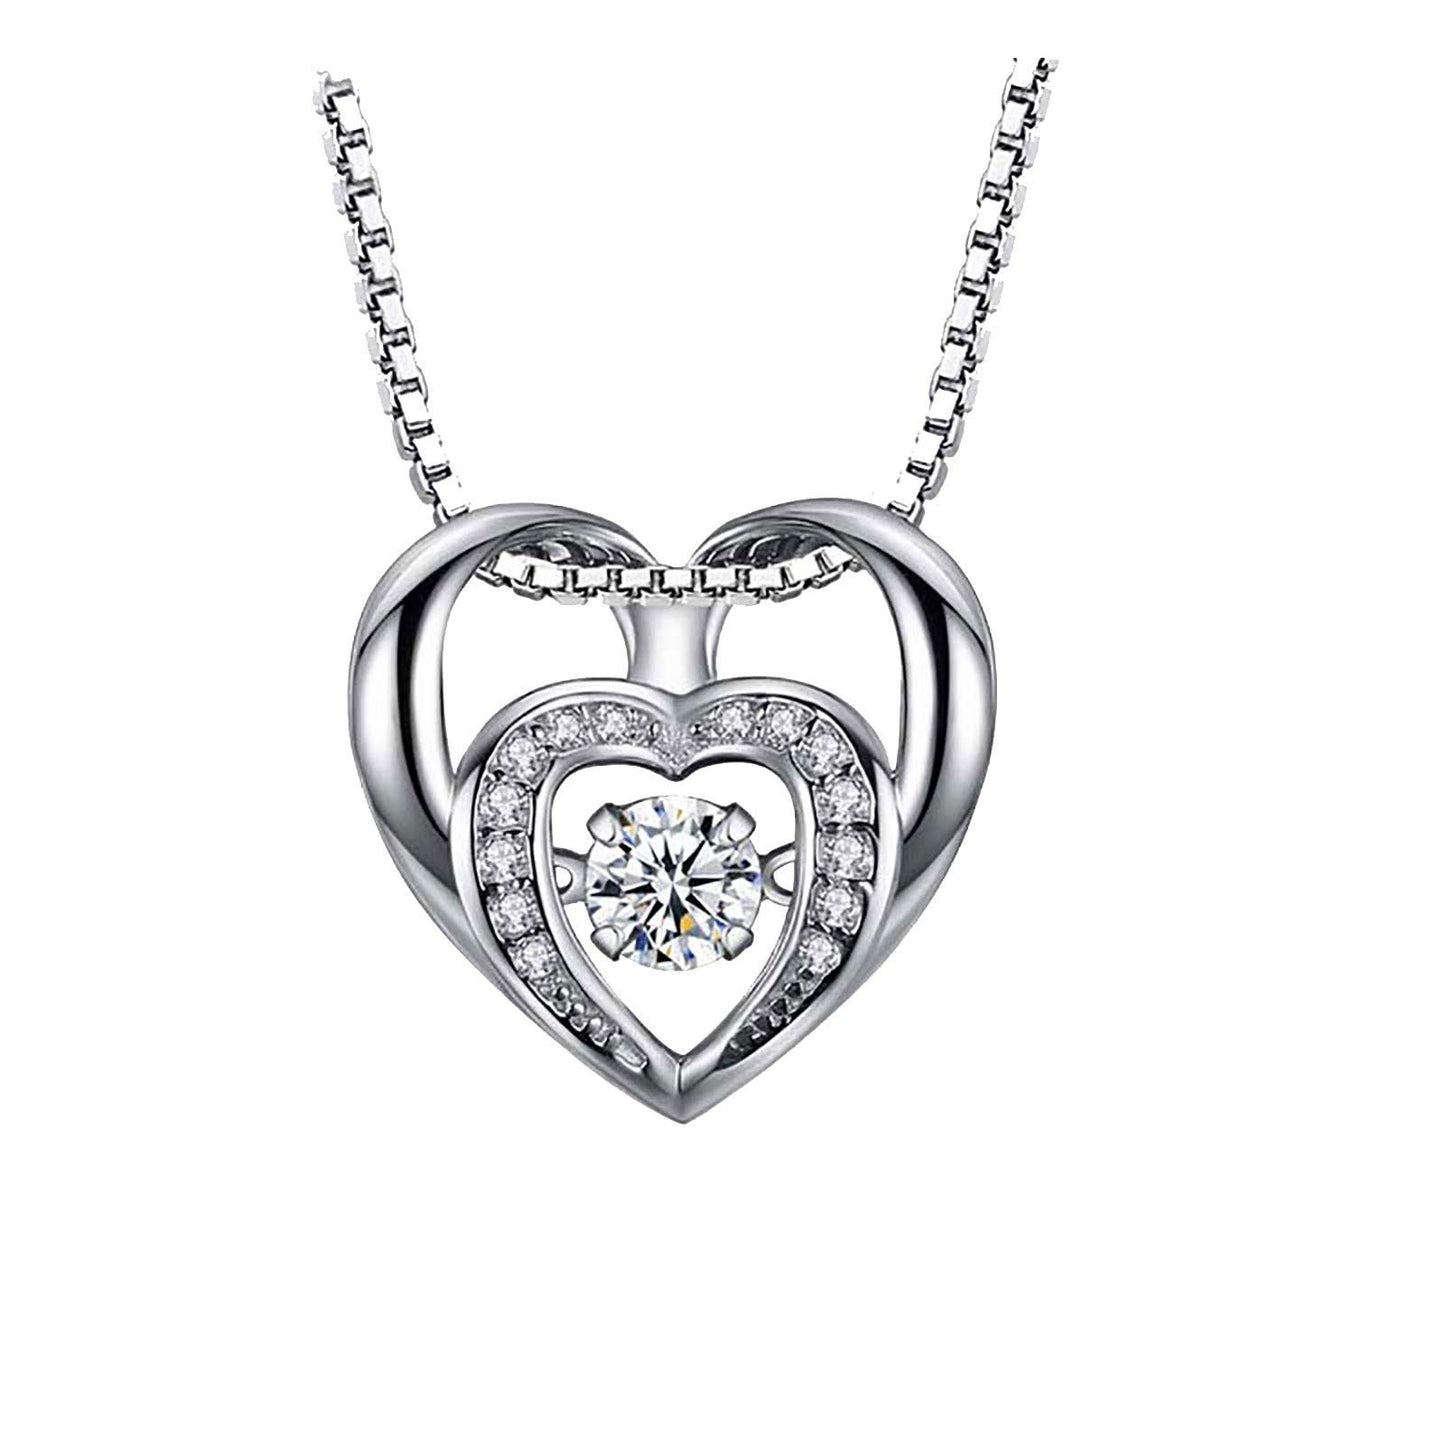 European And American Alloy Heart-shaped Pendant Necklace